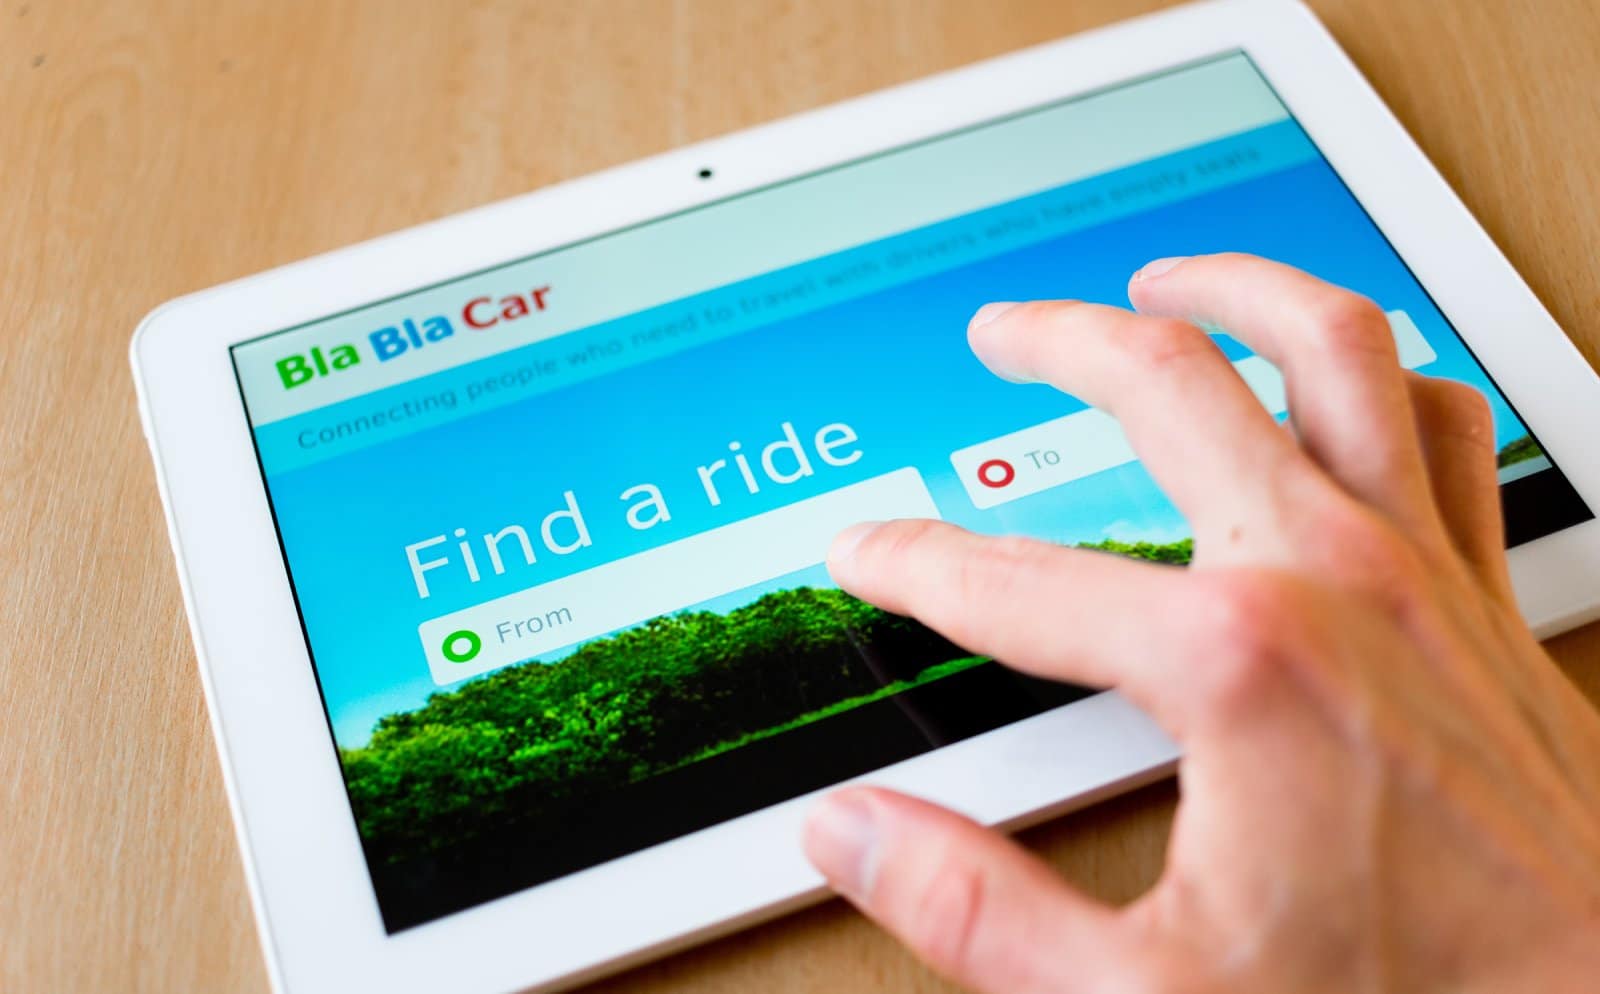 Image credit: Shutterstock / M-SUR <p>Long-distance carpooling could cut your travel costs dramatically. BlaBlaCar connects drivers with empty seats to passengers looking for a ride, often costing 50-70% less than a train ticket.</p>